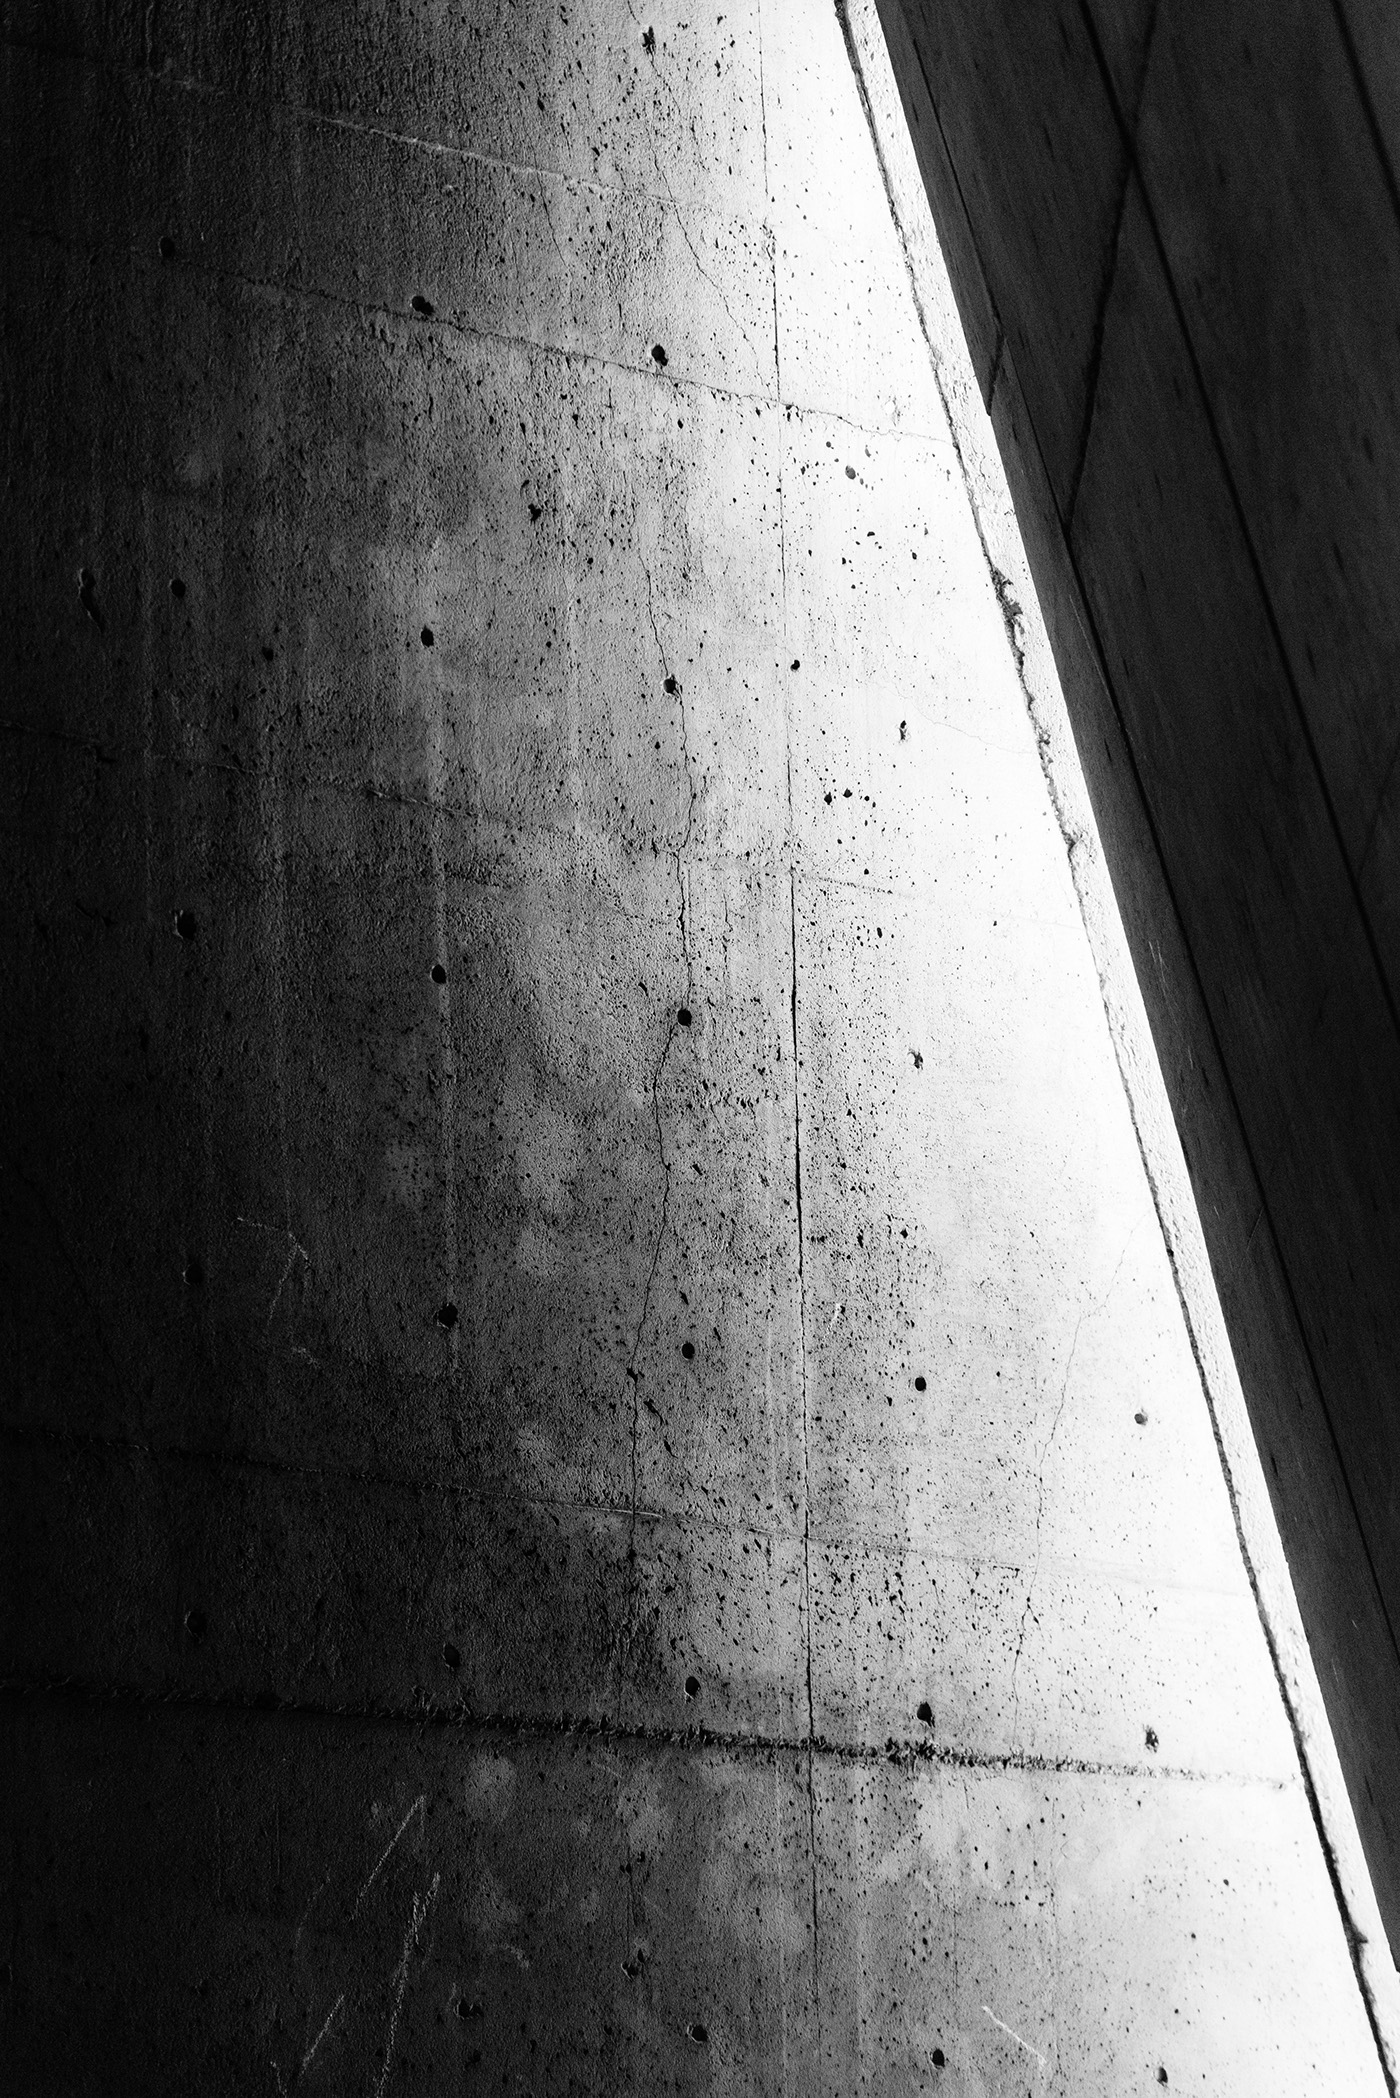 paterns lines shapes black and white architecture Montreal underground concrete Urban contrast